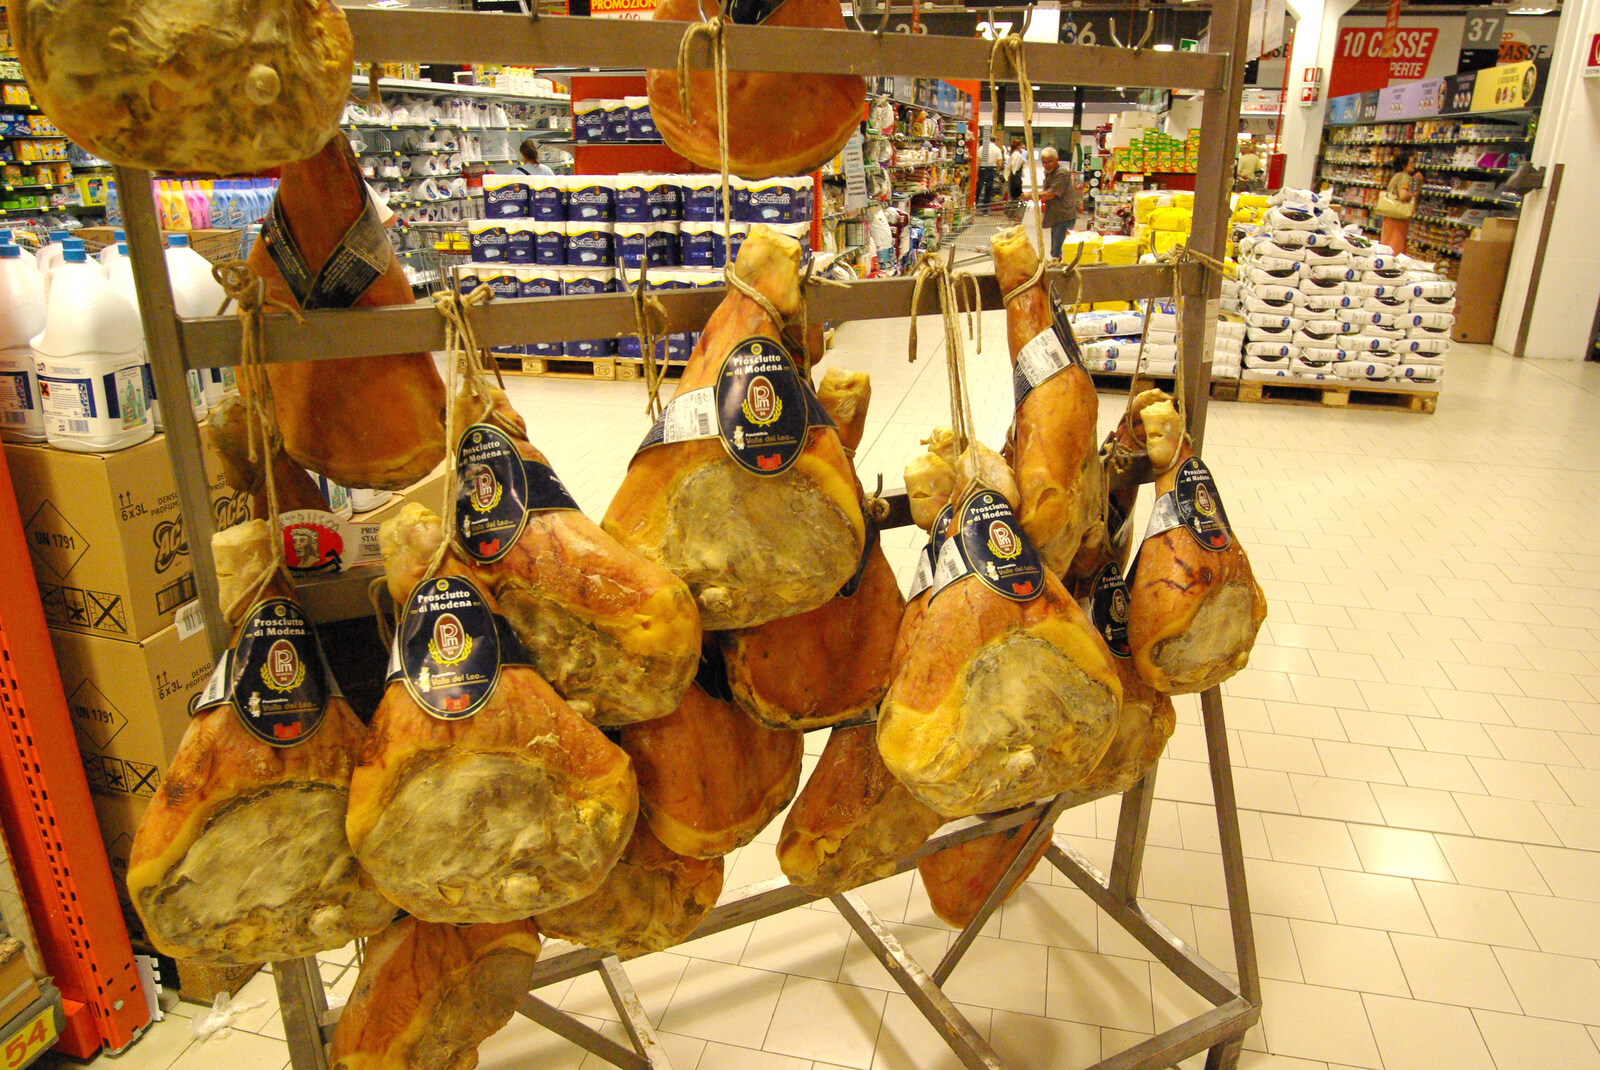 Tenuta Il Palazzo in Arezzo, Tuscany, Italy - 22nd July 2008: A bunch of hanging proscuitto hams in the Ipercoop